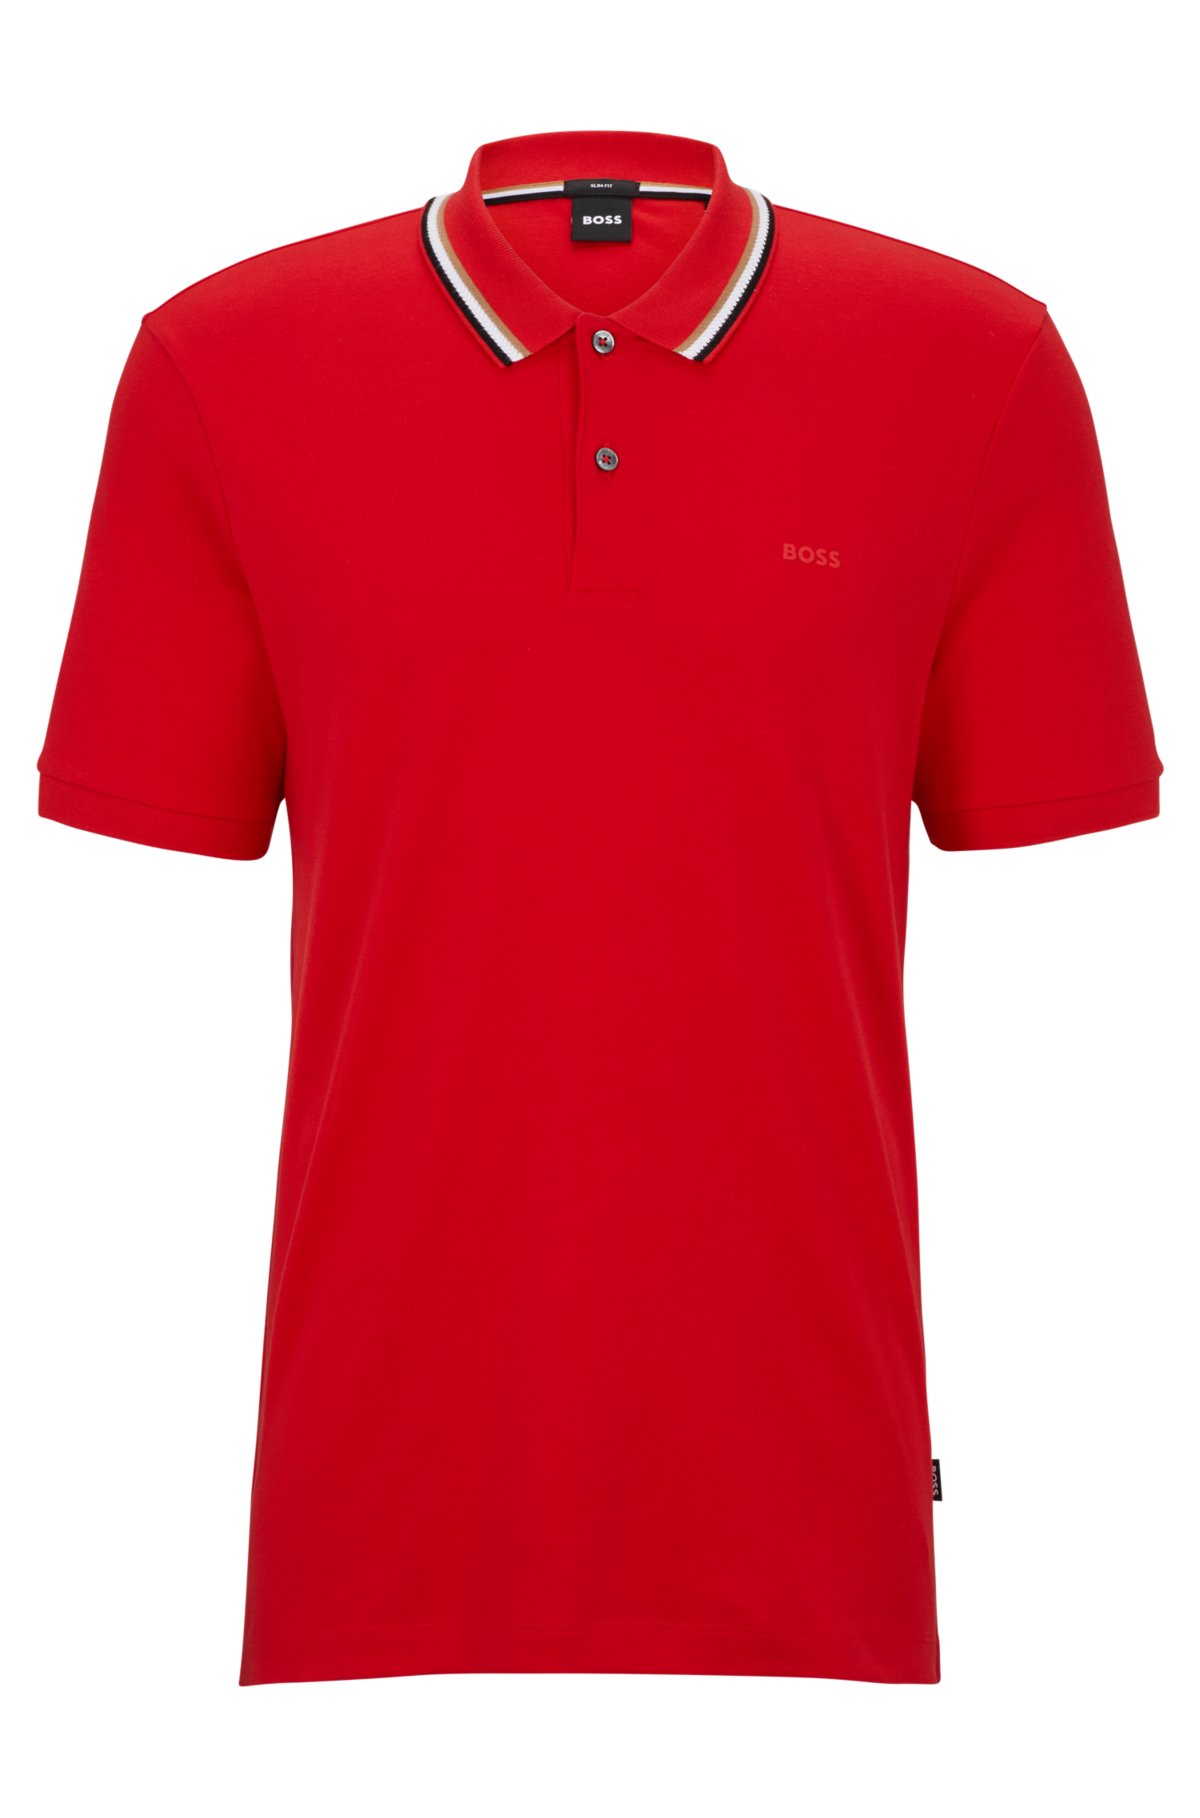 Cotton Polo T Shirt - Cotton Polo Neck T Shirt Latest Price, Manufacturers  & Suppliers